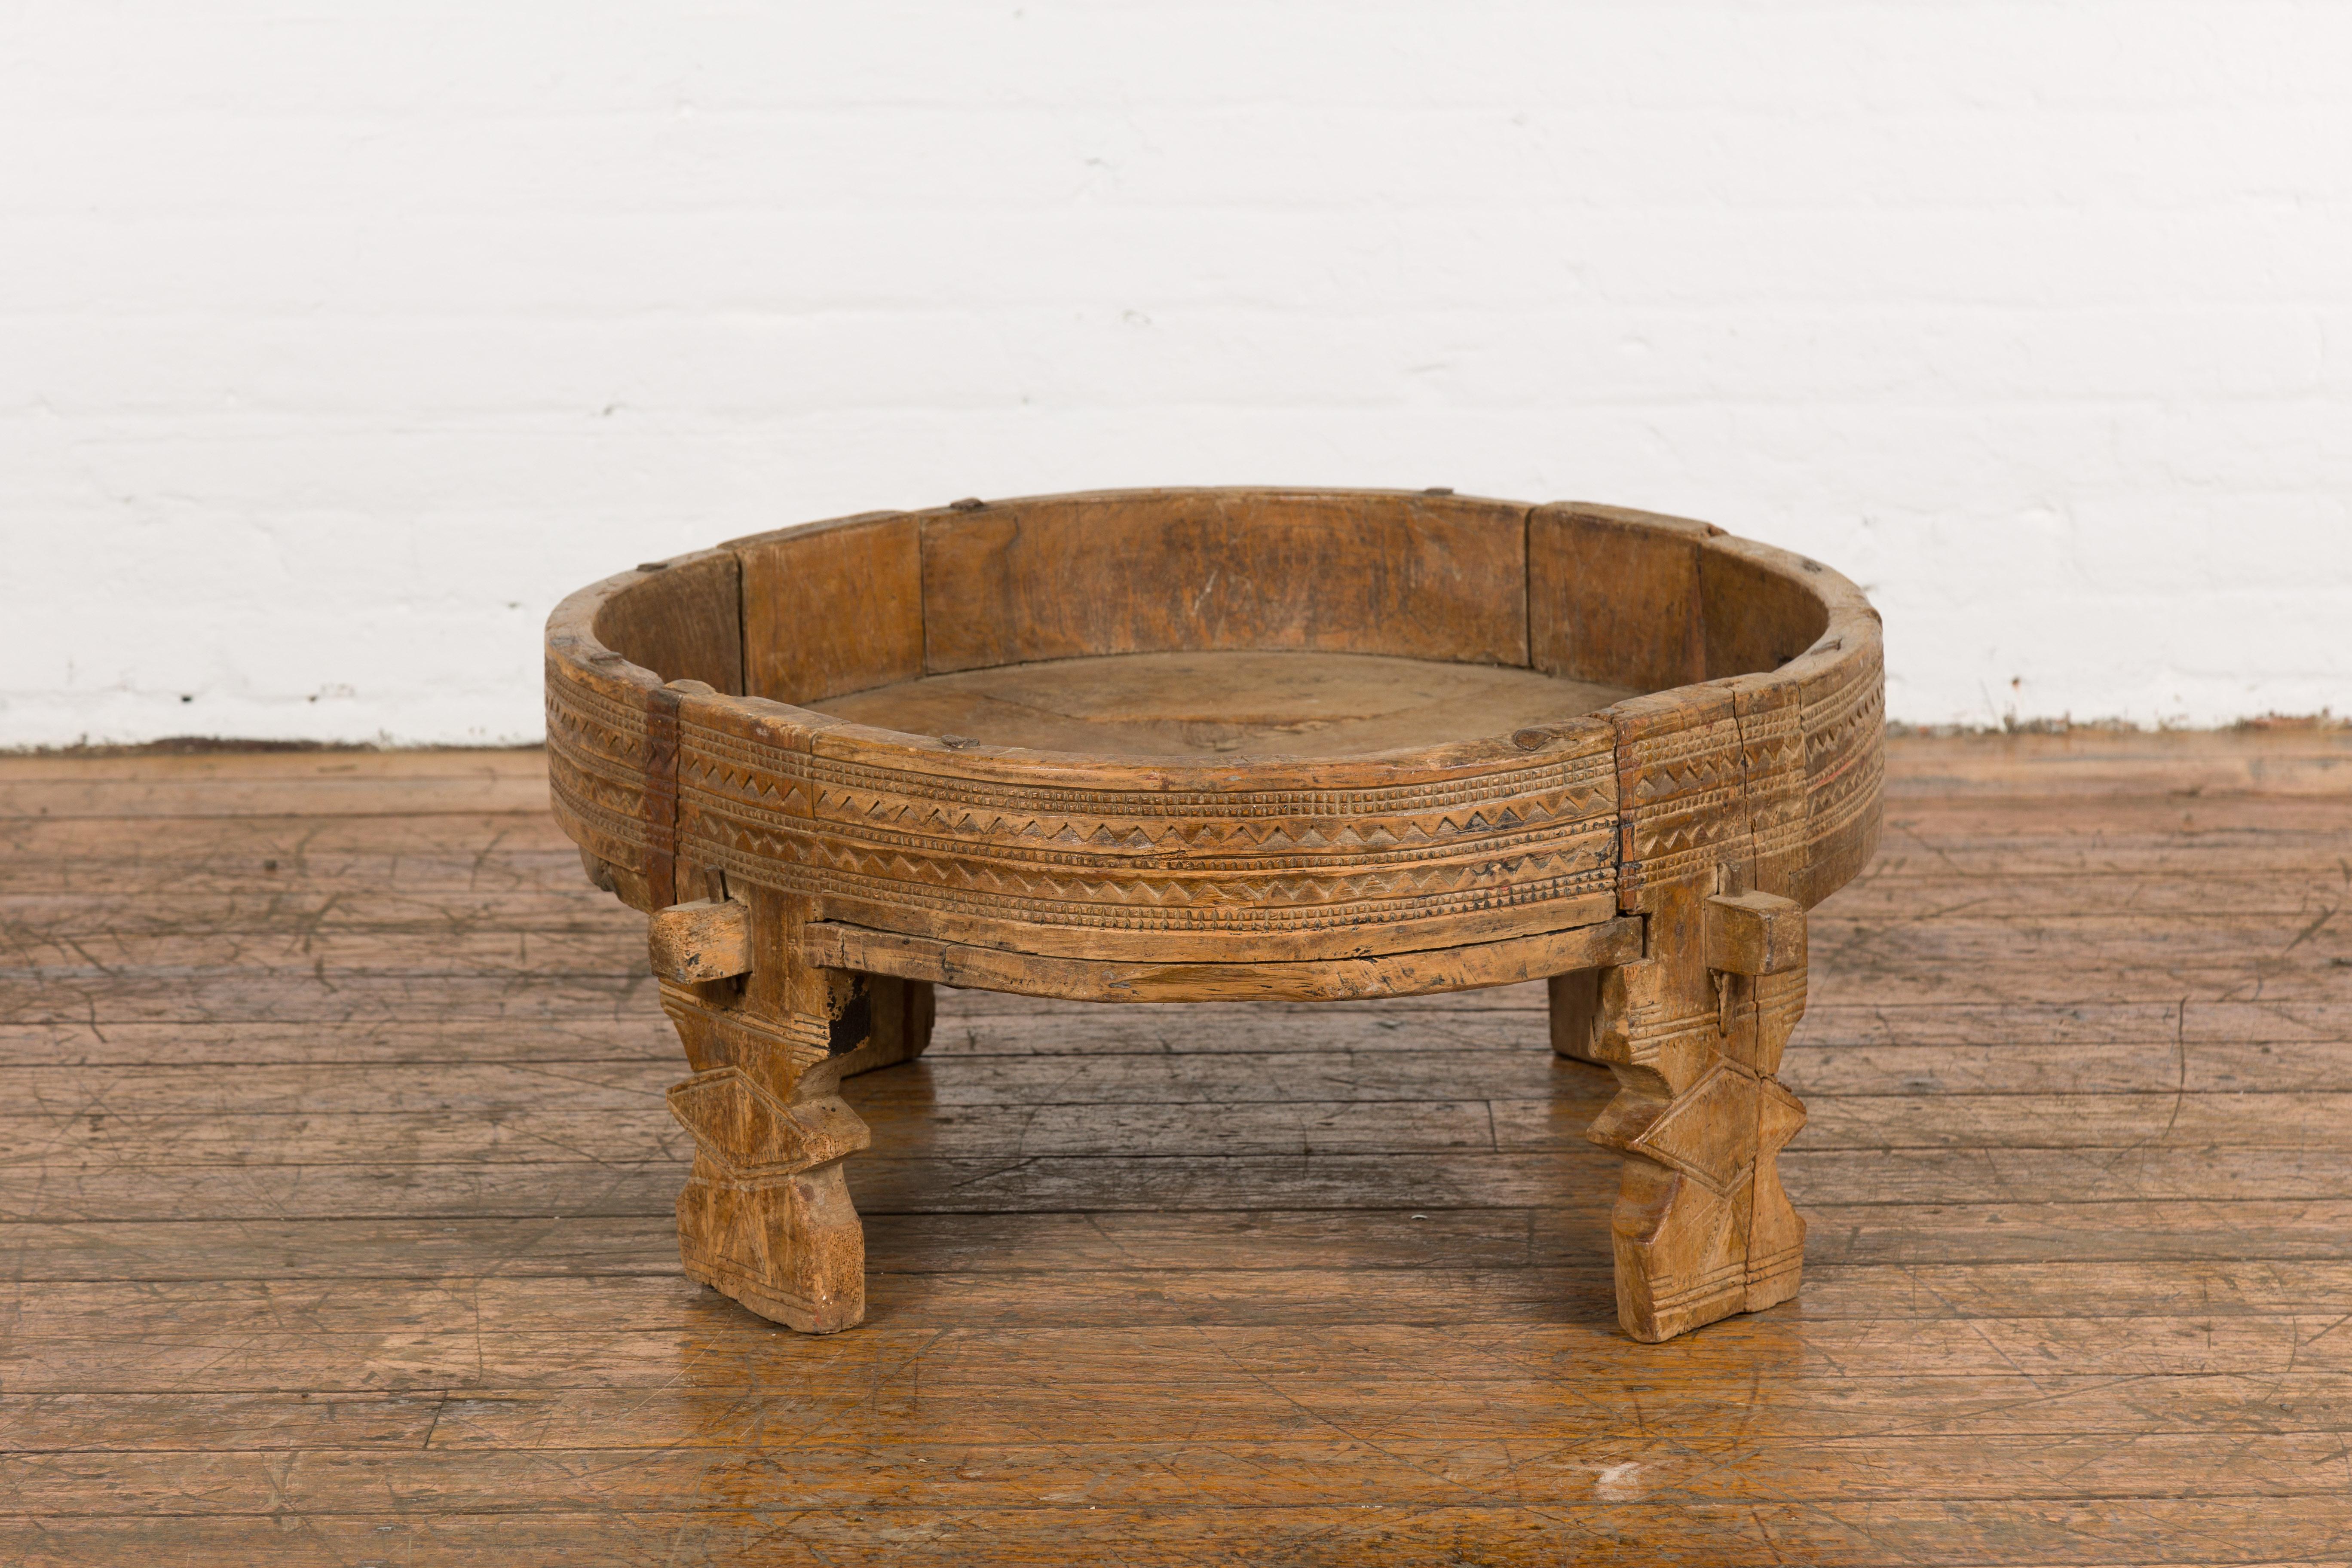 A Tribal Indian rustic teak wood Chakki grinder table from the 1920s with hand-carved geometric motifs, open center, carved feet and weathered patina. Discover the enchanting allure of this tribal Indian rustic teak wood Chakki grinder table from